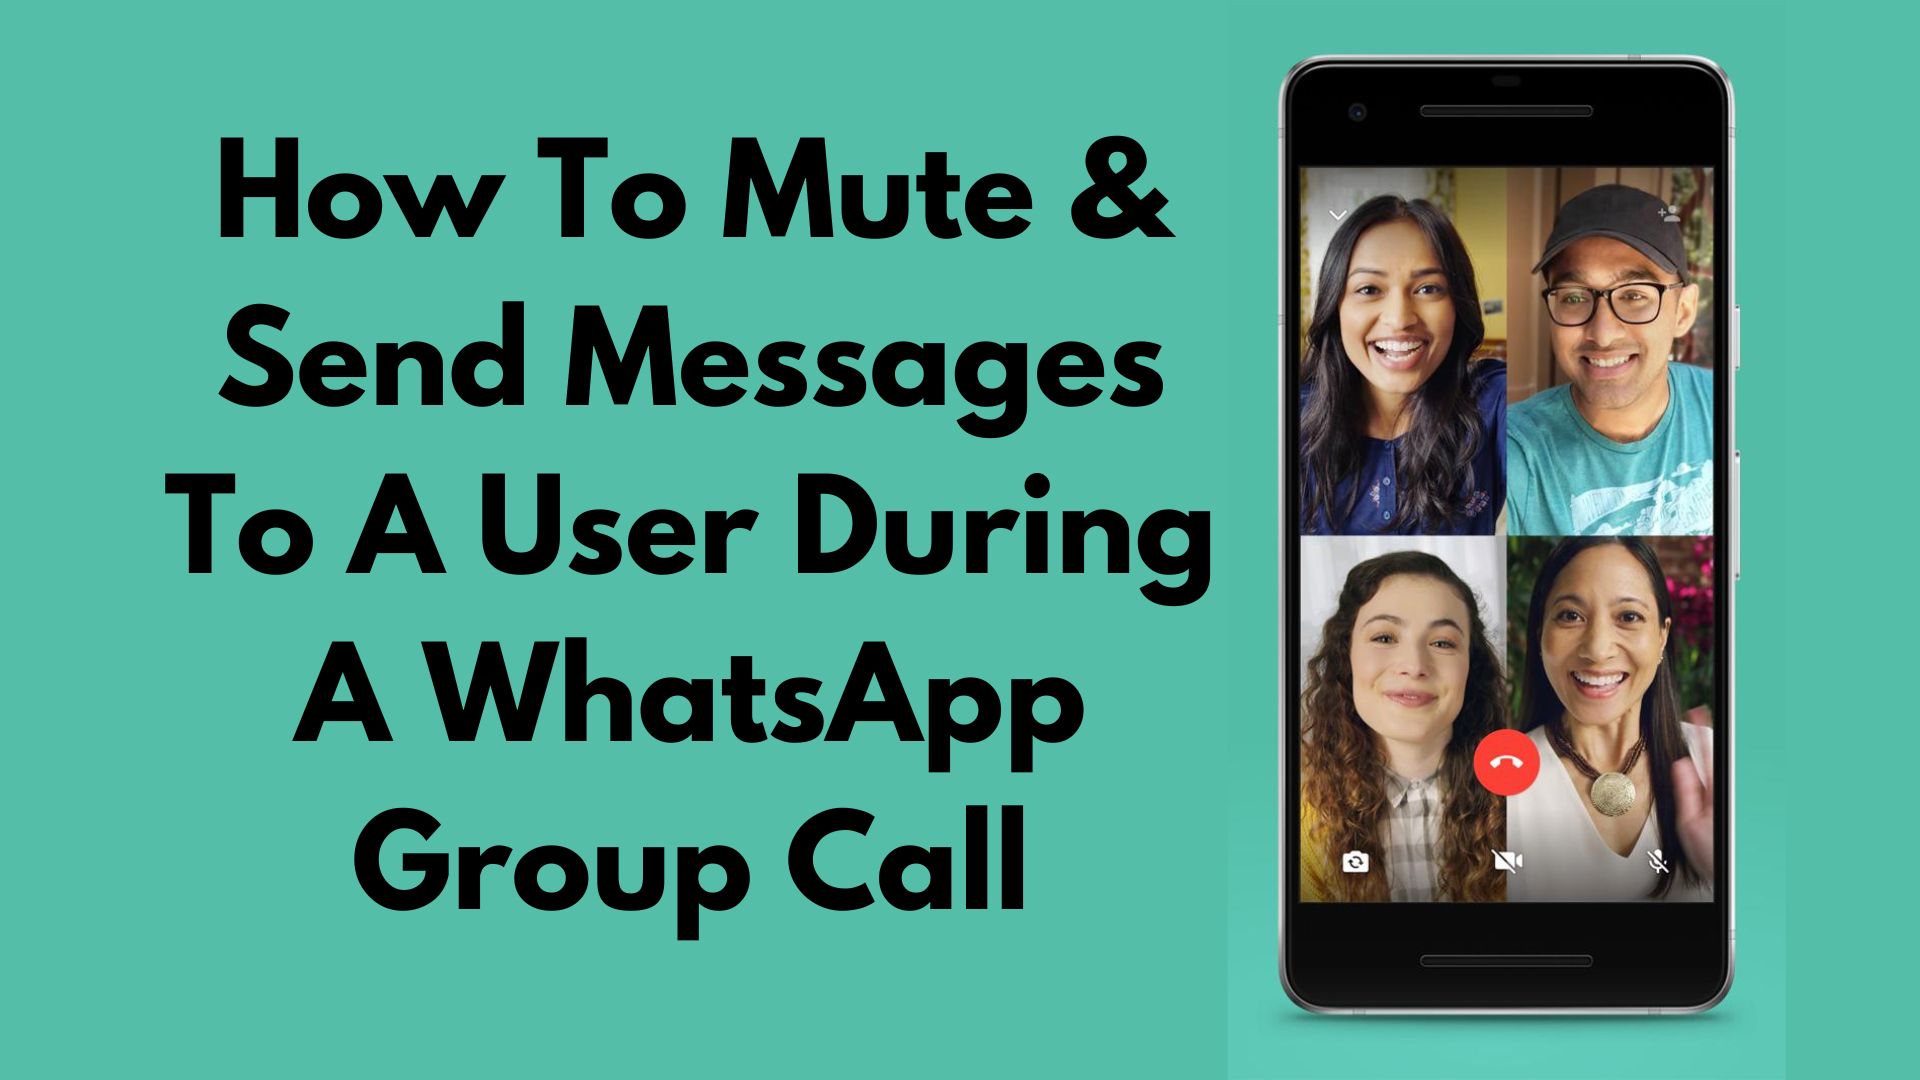 How To Mute & Send Messages To A User During A WhatsApp Group Call